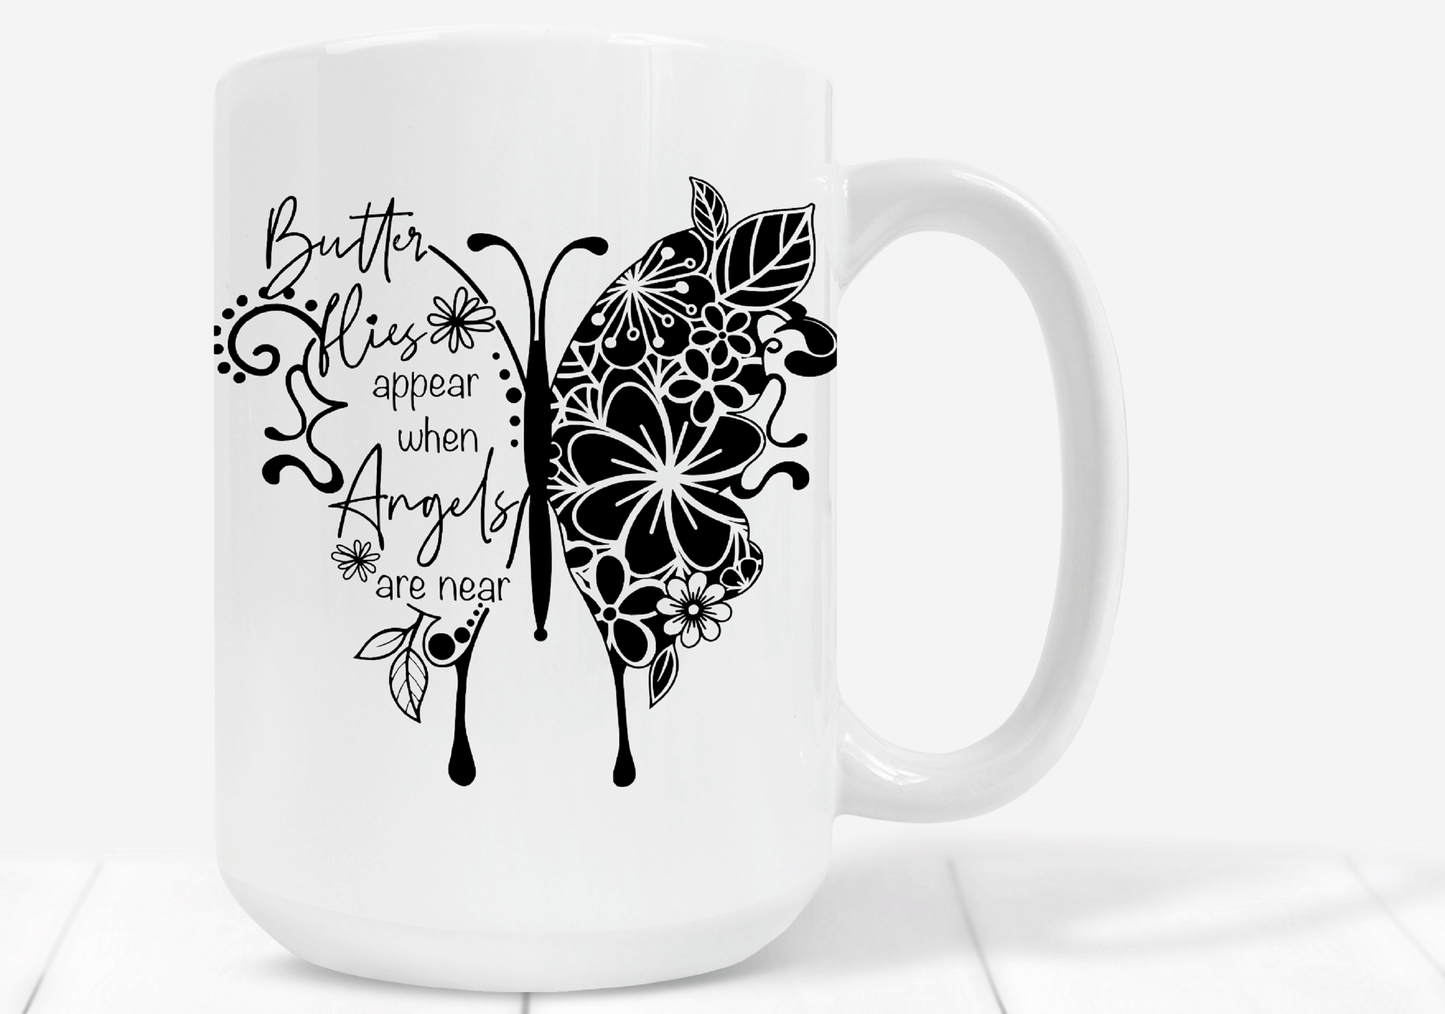  Butterflies Appear When Angels Are Near Mug by Free Spirit Accessories sold by Free Spirit Accessories